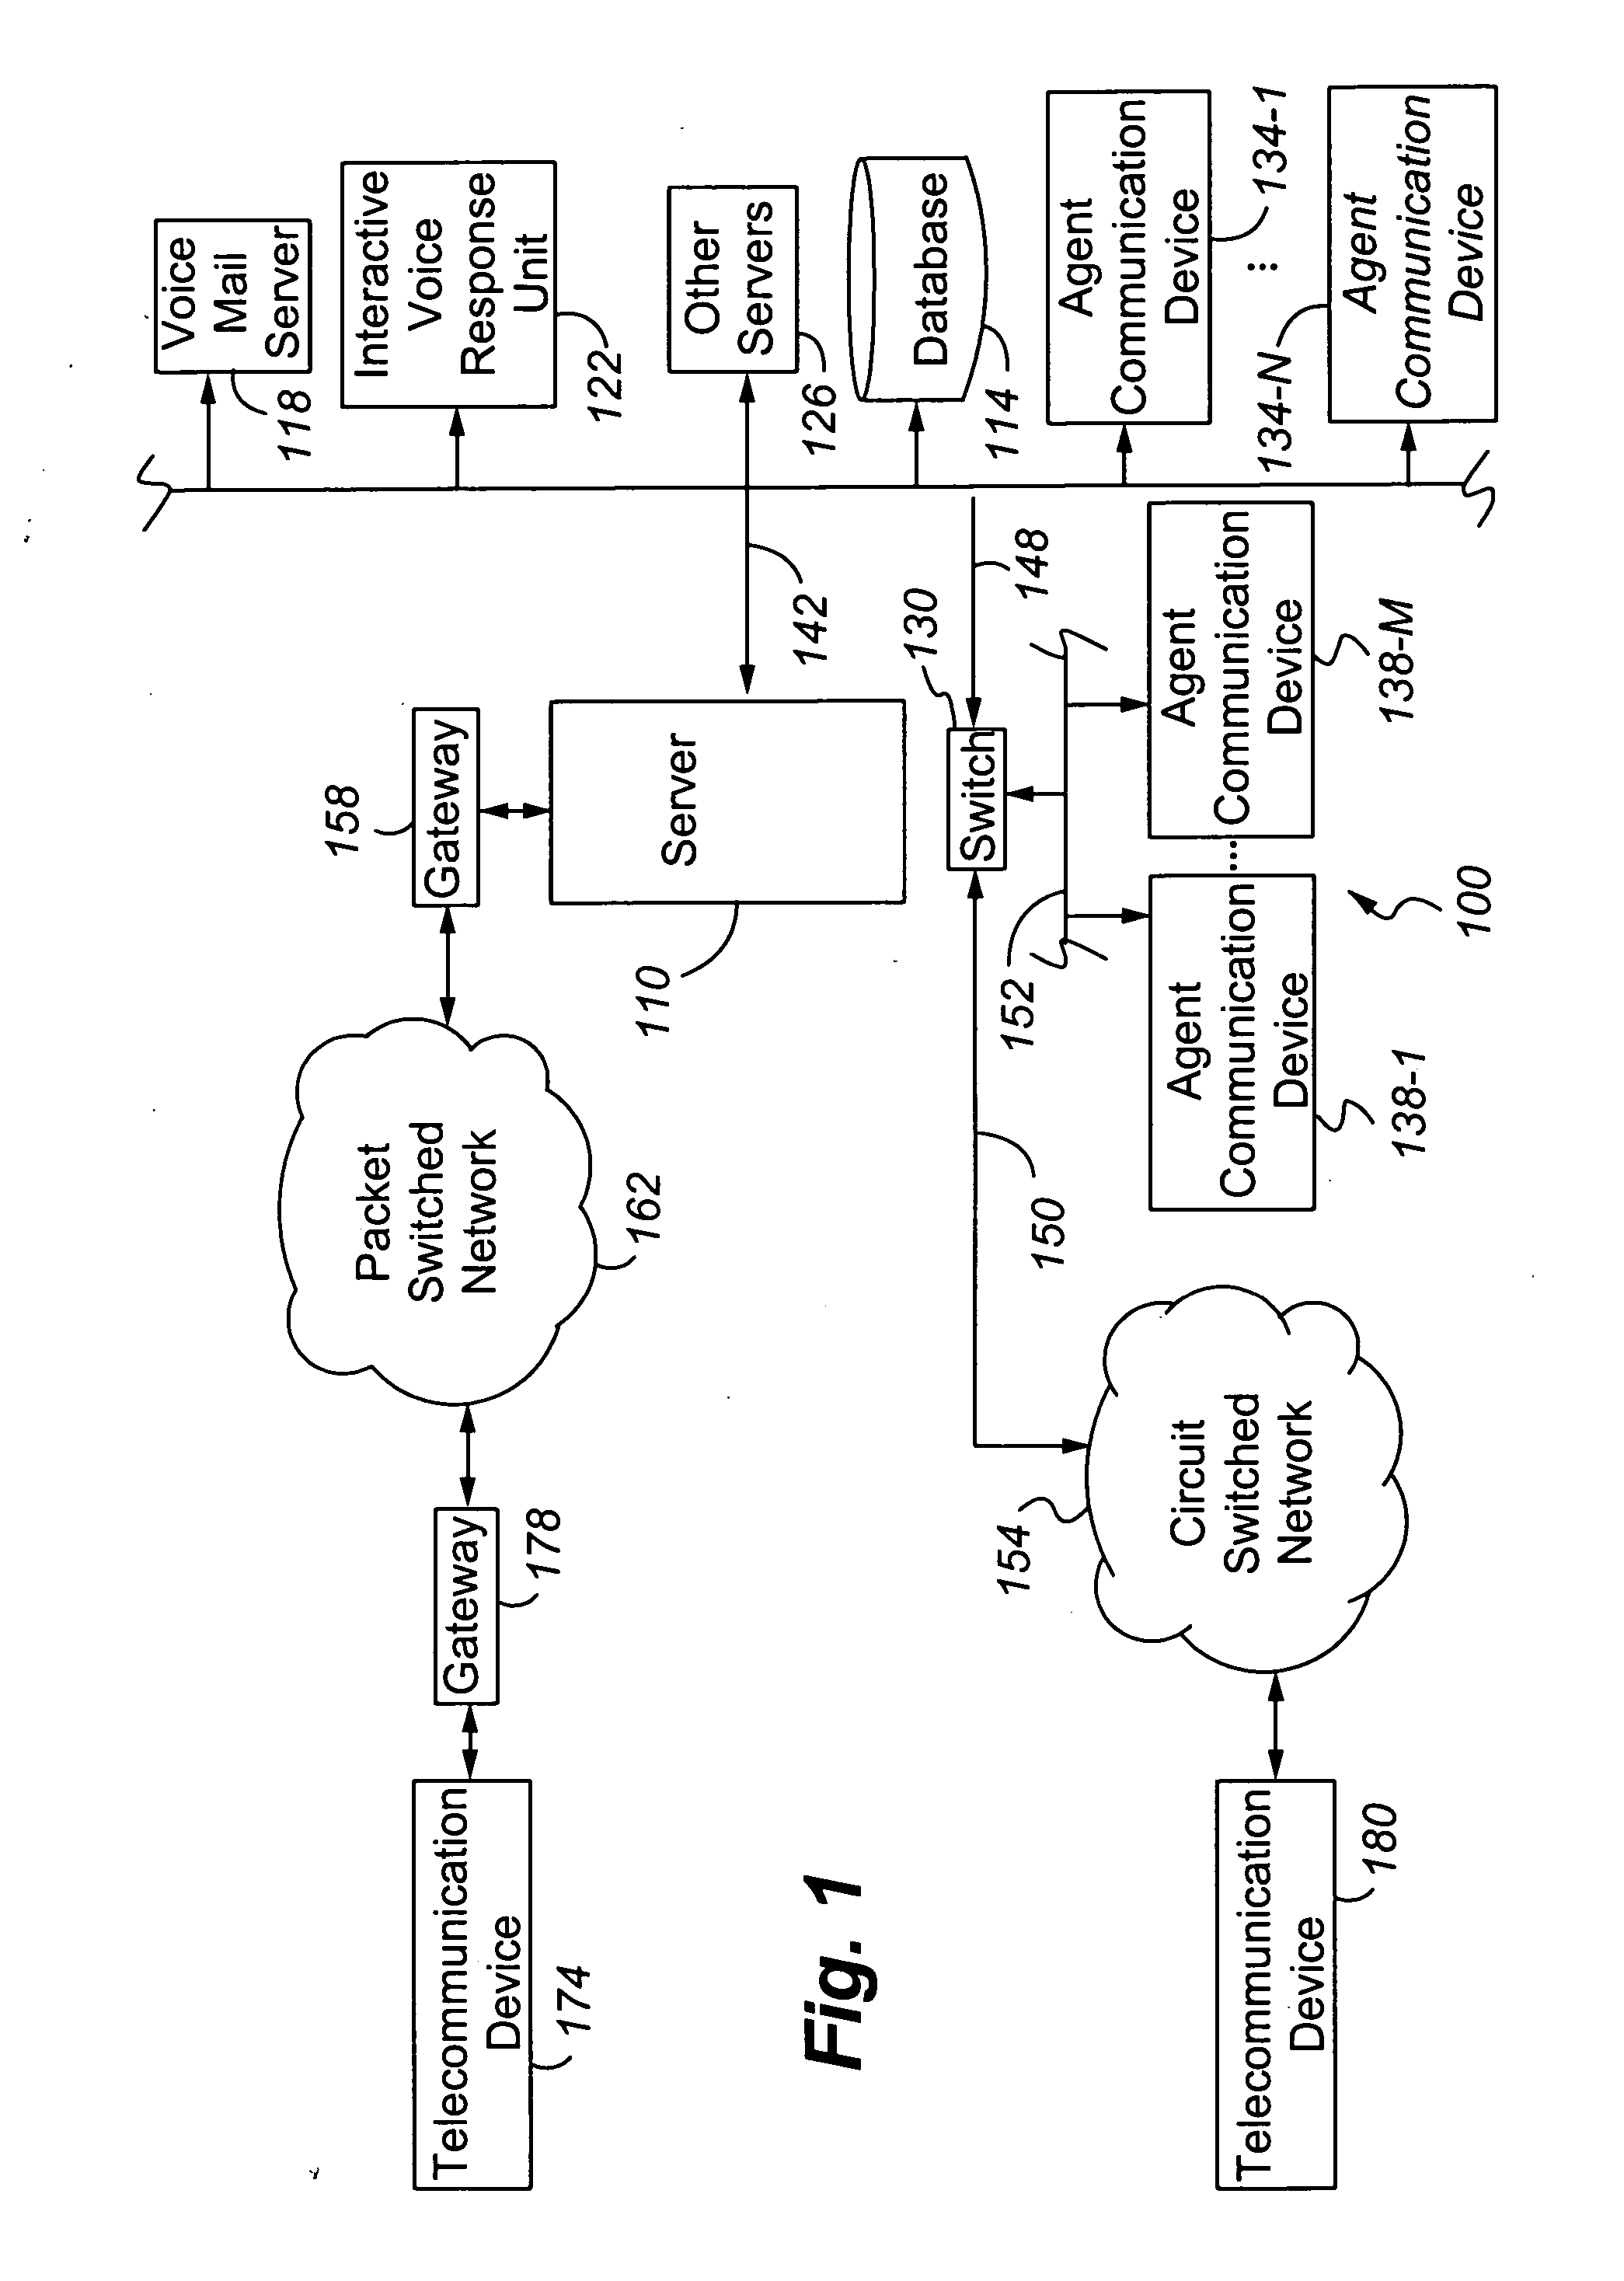 Method and apparatus for the automated delivery of notifications to contacts based on predicted work prioritization